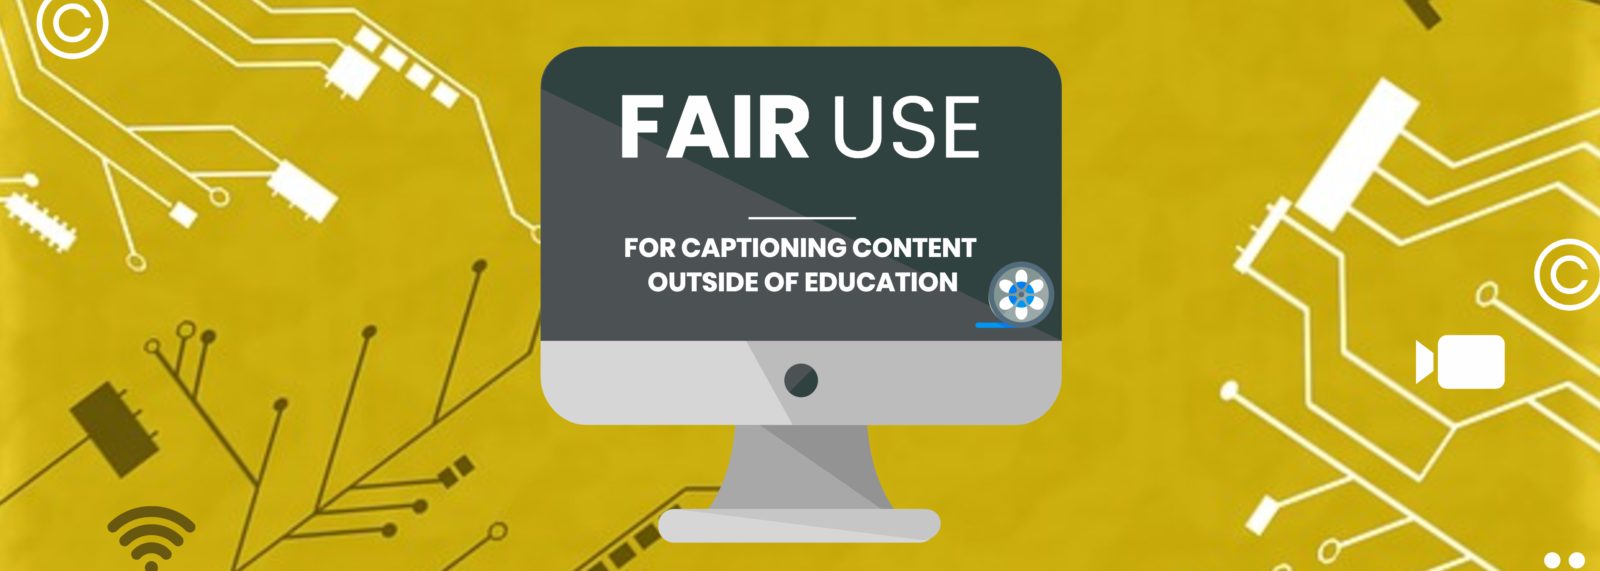 The title Fair Use for Captioning Content Outside of Education is on a laptop screen with a video reel below